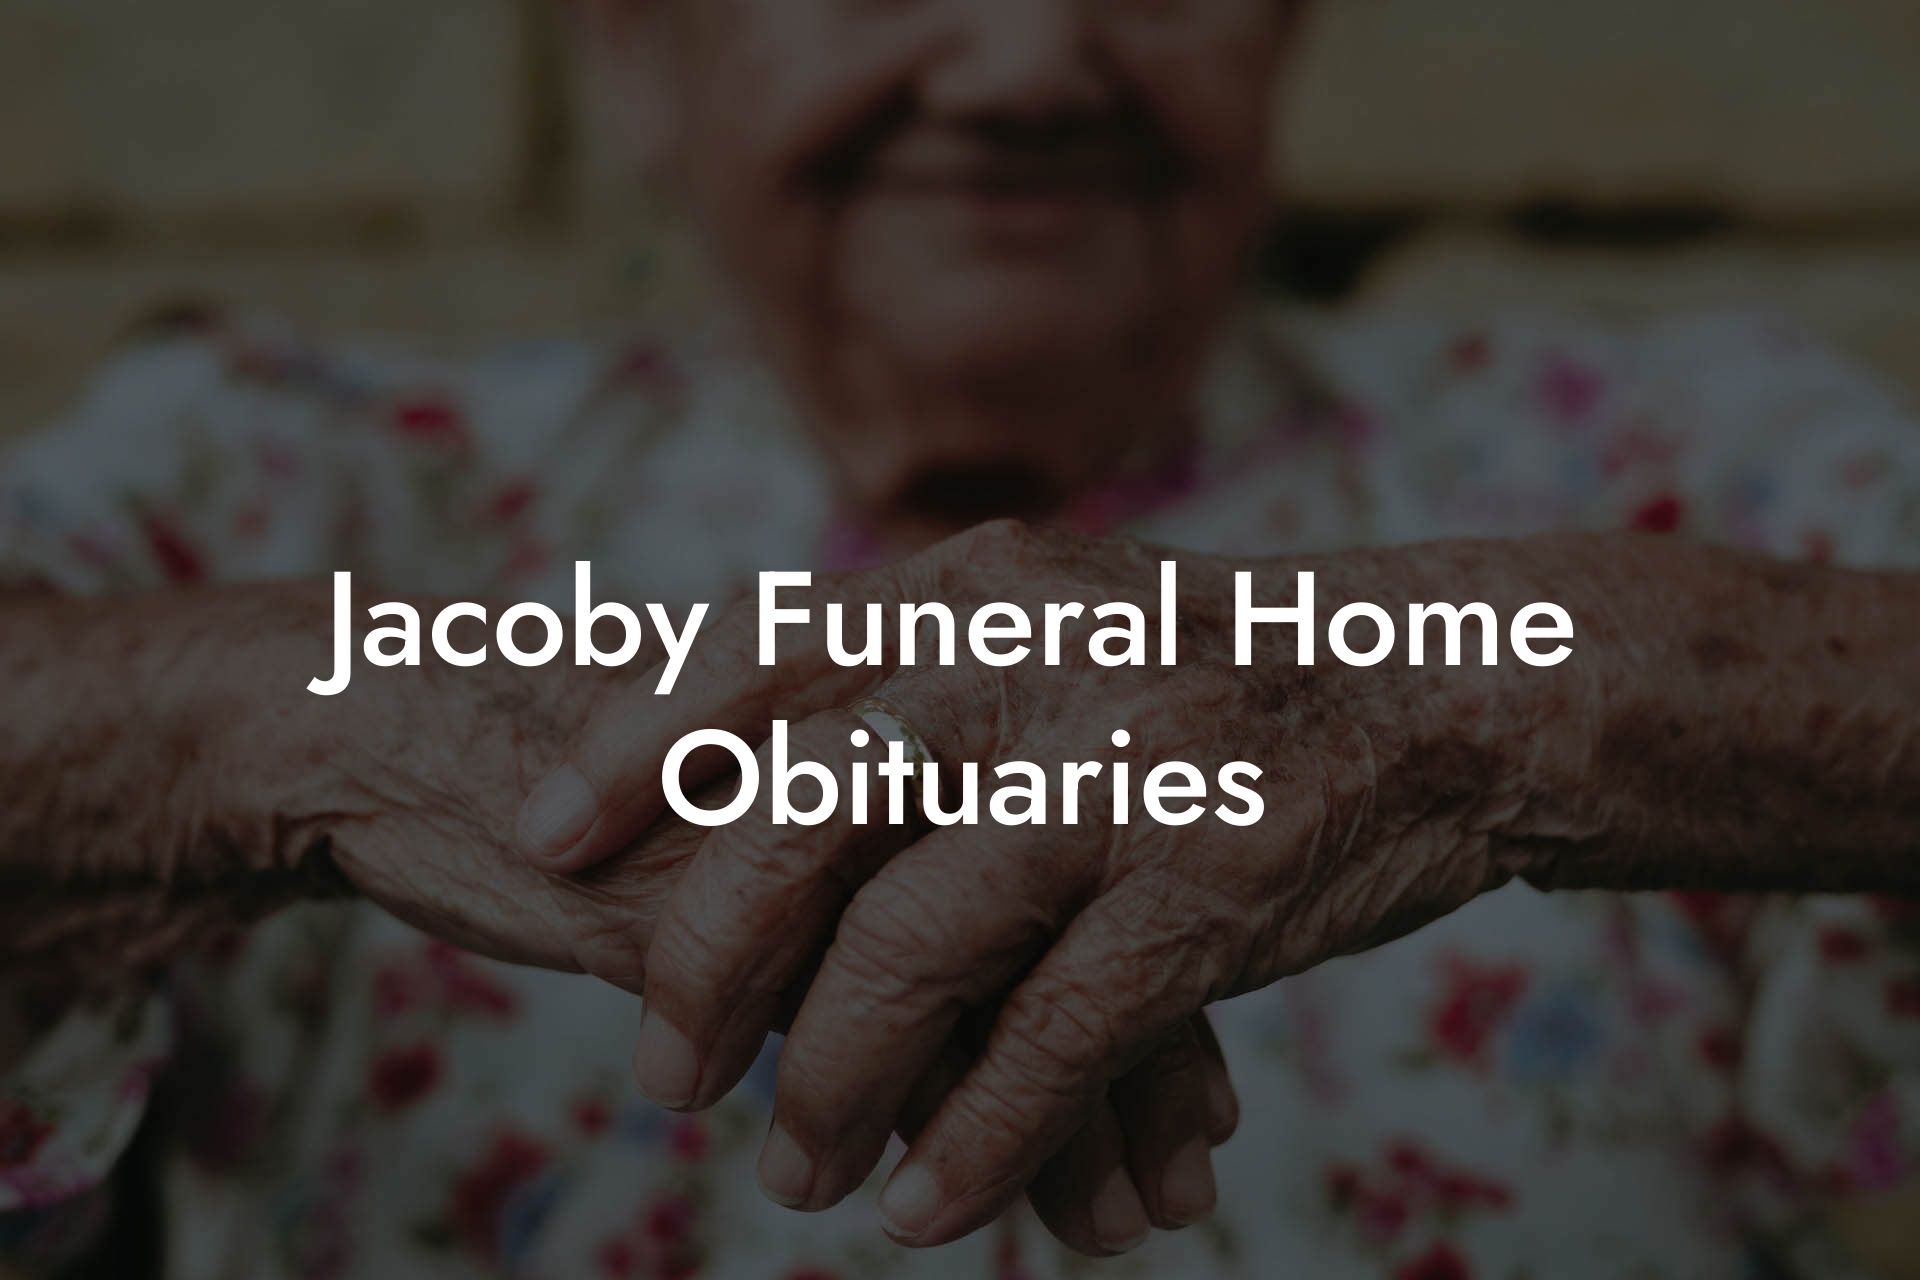 Jacoby Funeral Home Obituaries